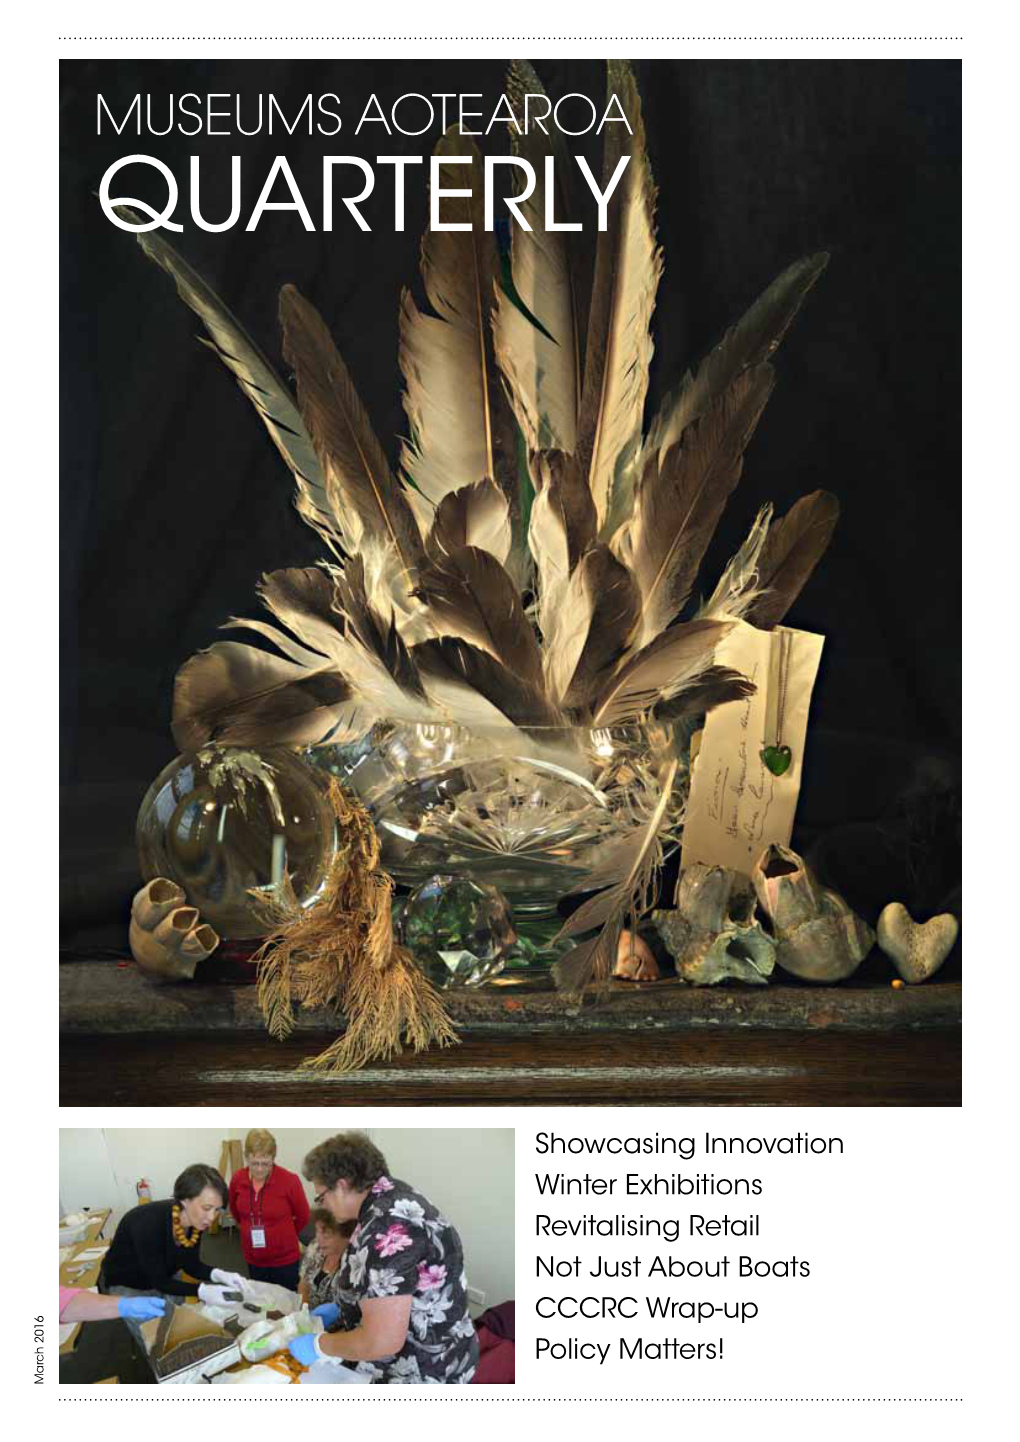 Showcasing Innovation Winter Exhibitions Revitalising Retail Not Just About Boats CCCRC Wrap-Up Policy Matters! March 2016 March Contents Museums Aotearoa